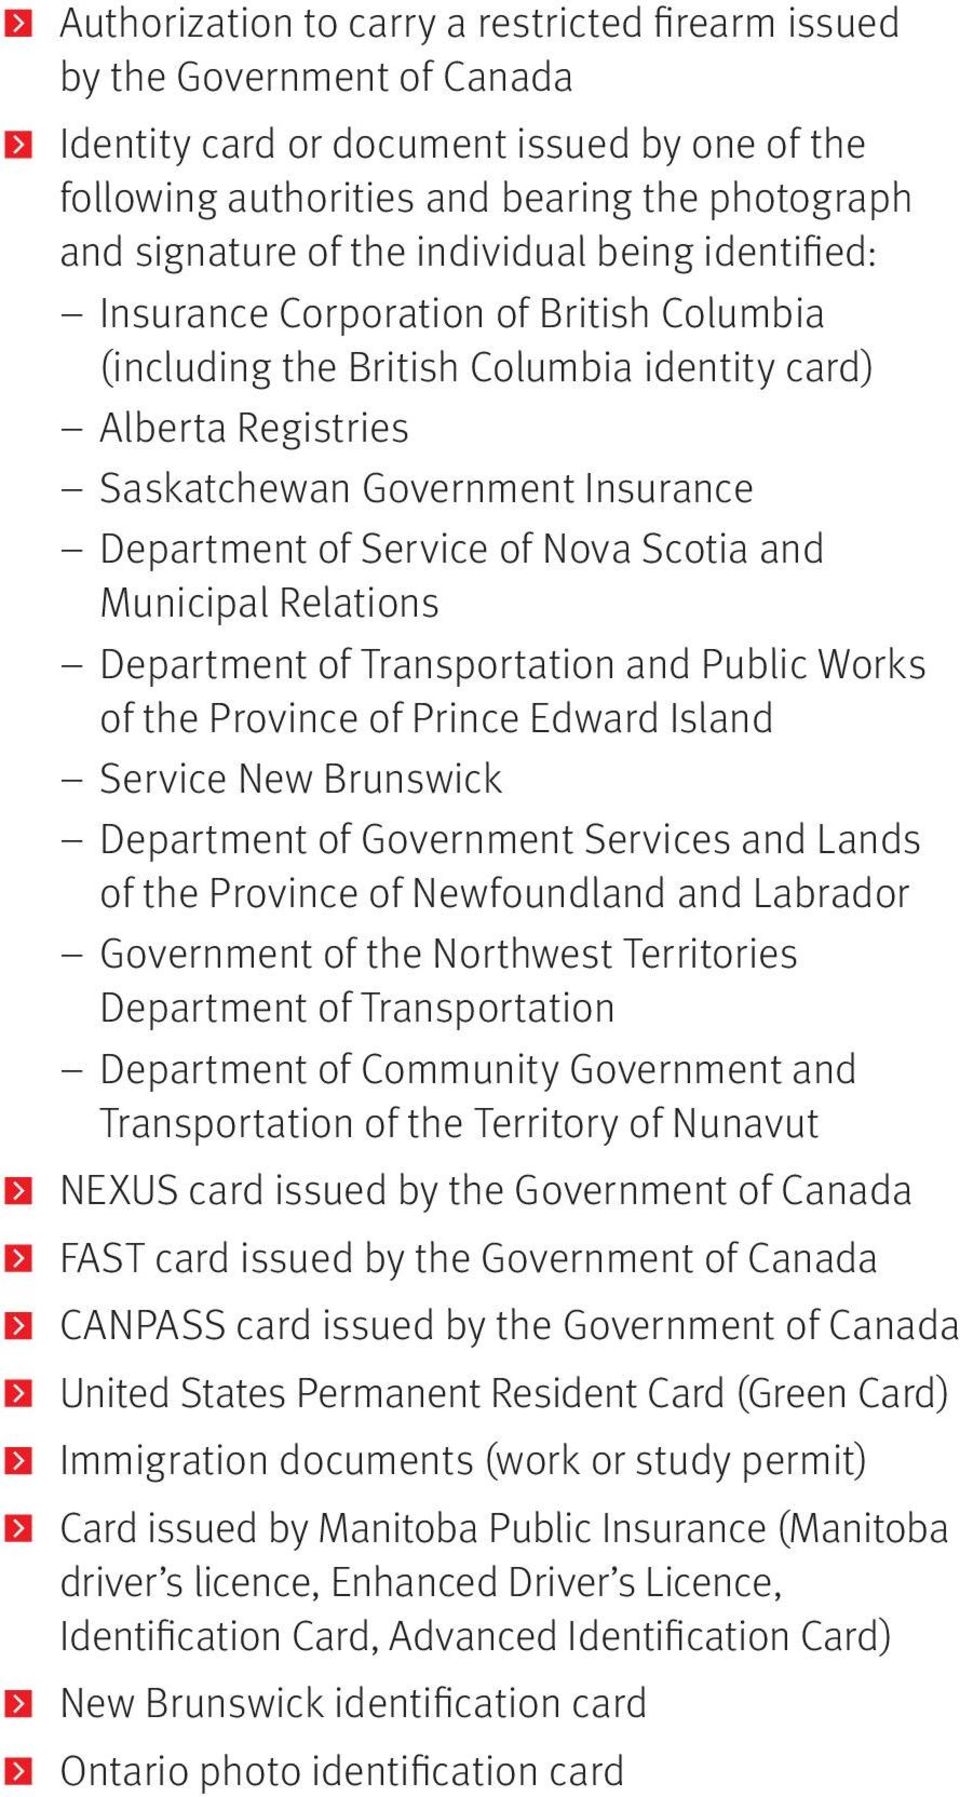 Nova Scotia and Municipal Relations Department of Transportation and Public Works of the Province of Prince Edward Island Service New Brunswick Department of Government Services and Lands of the